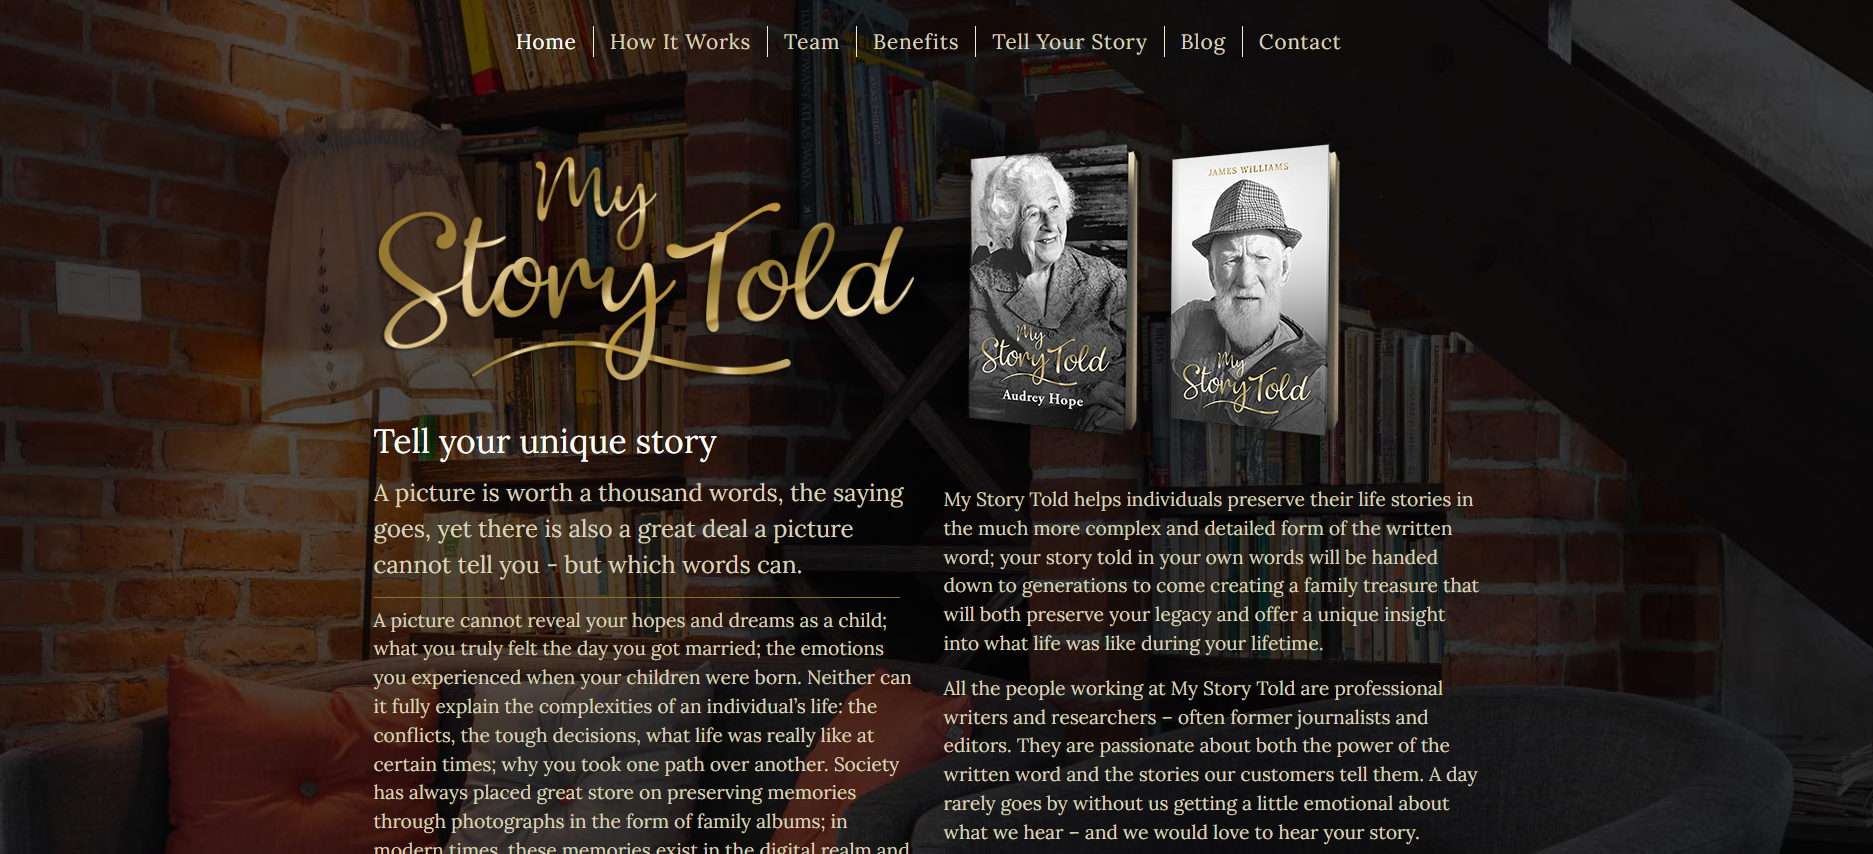 Case Study: My Story Told, the personal biography service